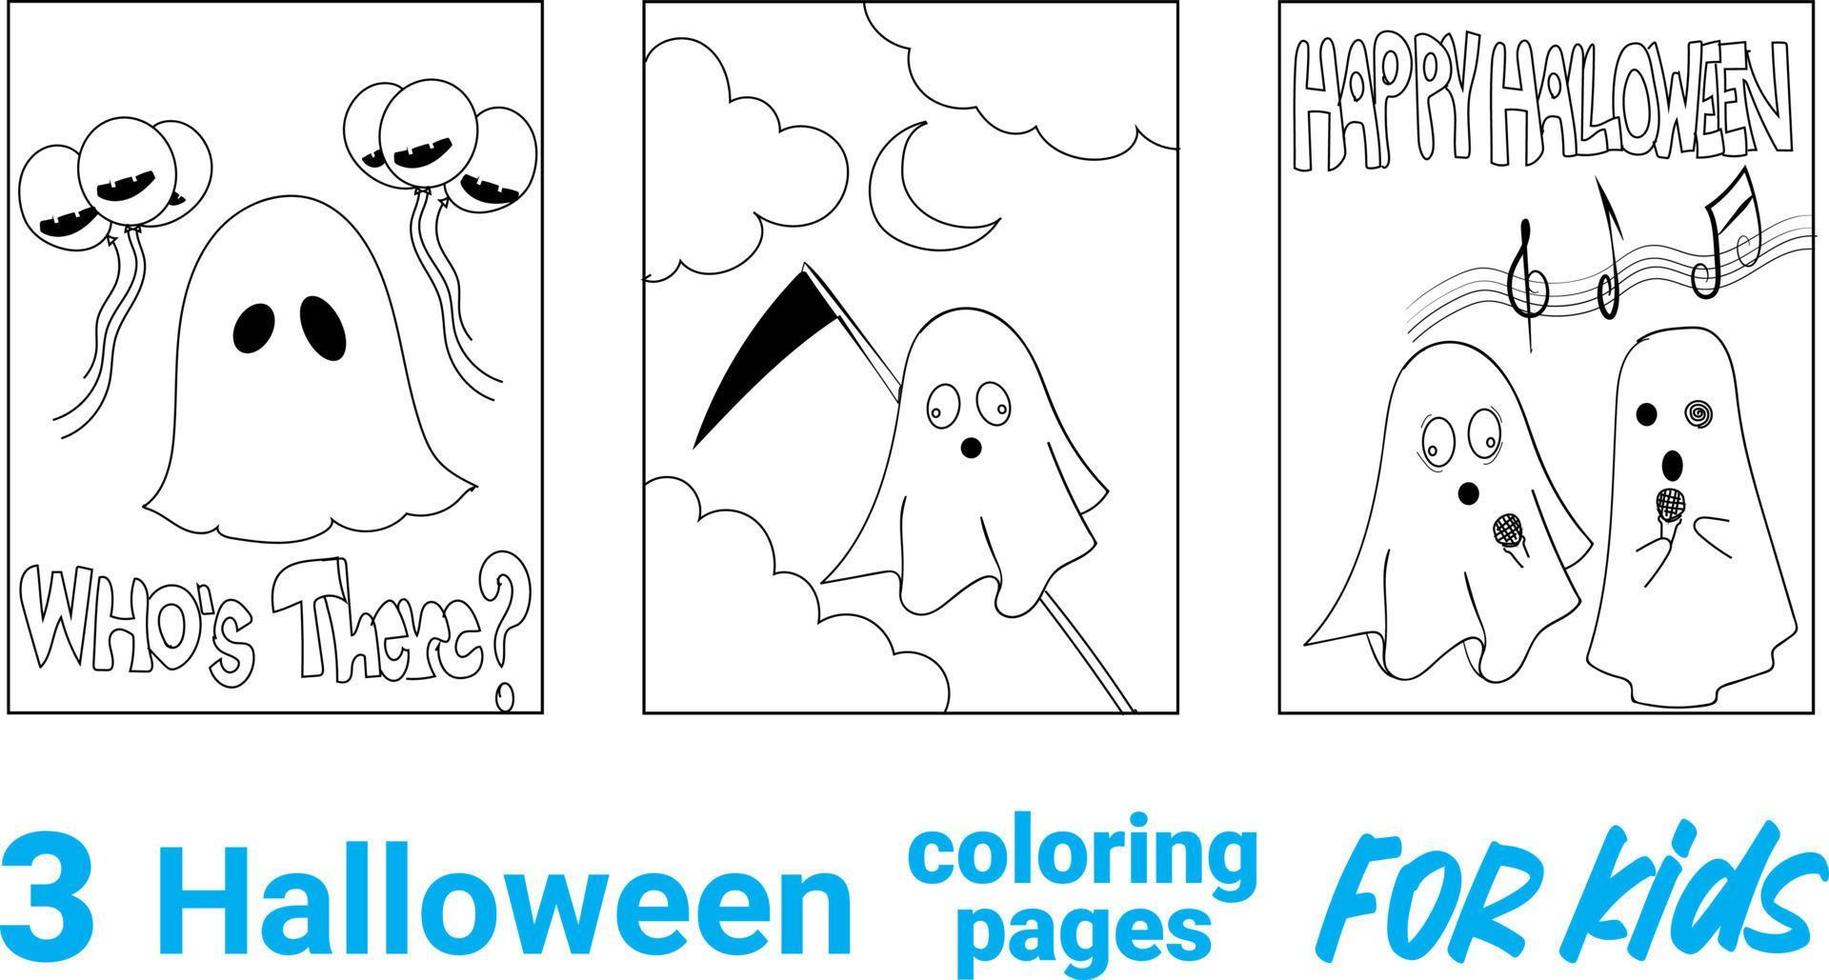 Coloring page. Black and white vector illustration with happy pumpkin in witch hat. Halloween spooky cottage coloring page for kids.